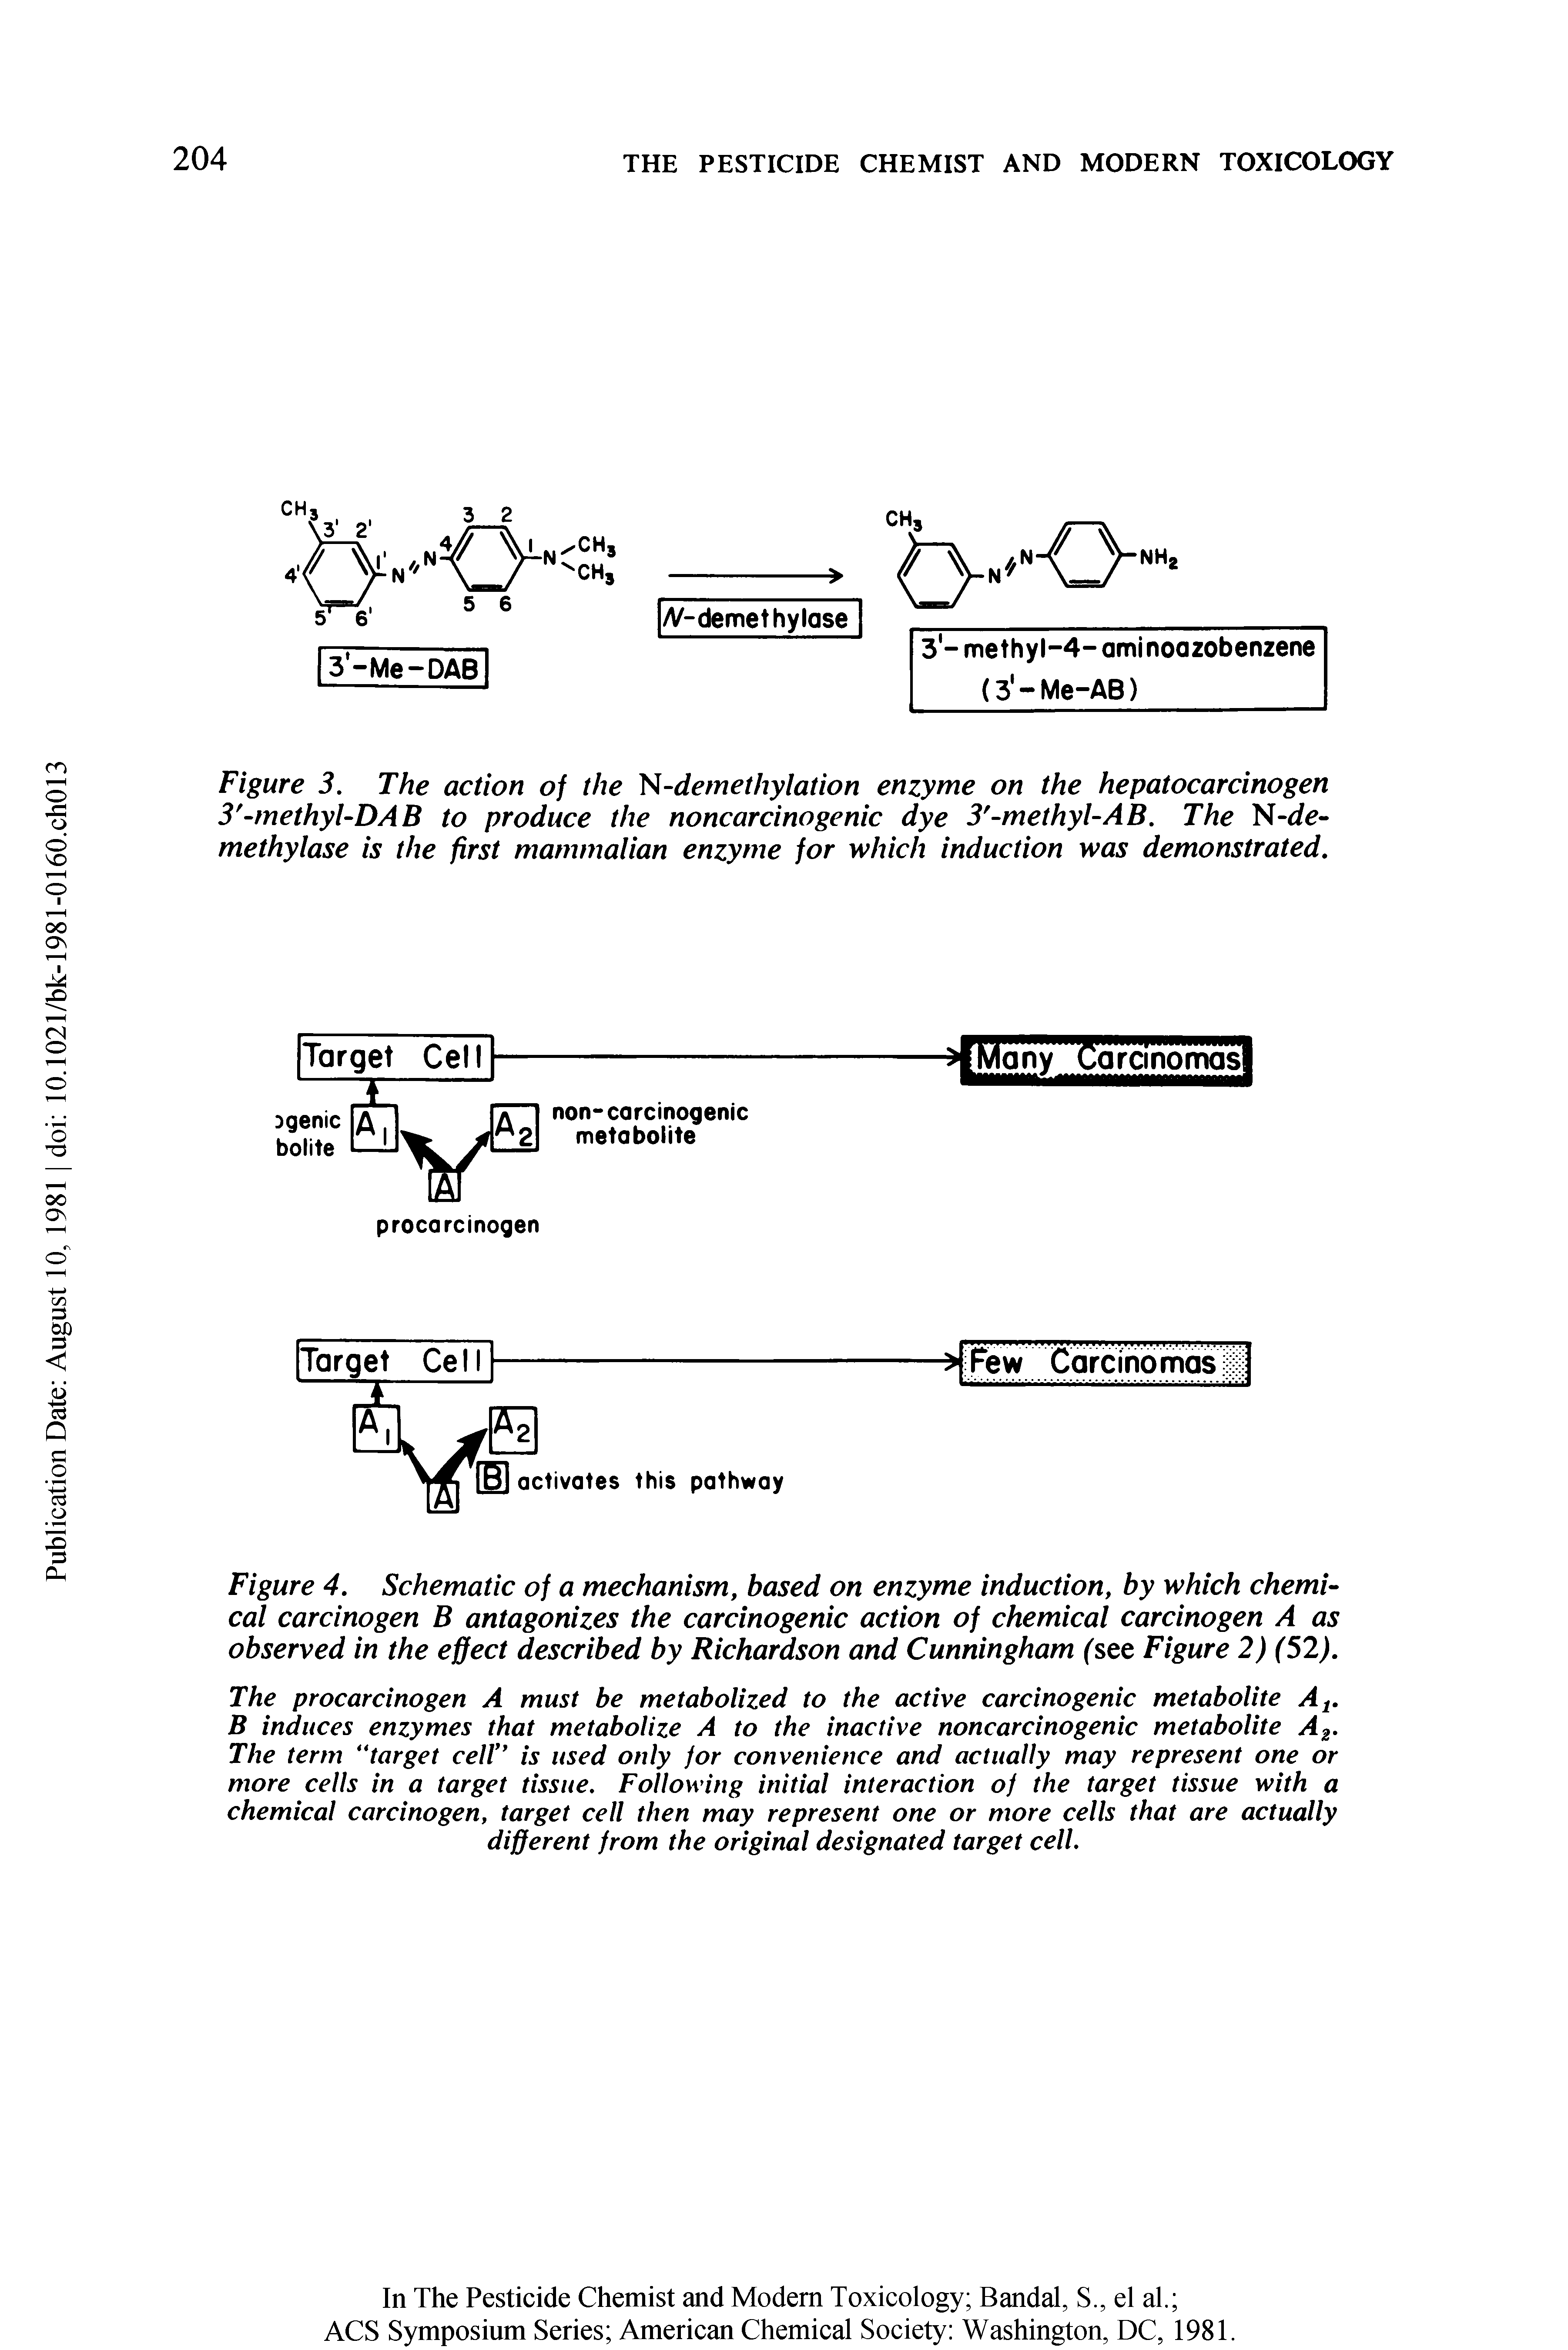 Figure 4. Schematic of a mechanism, based on enzyme induction, by which chemical carcinogen B antagonizes the carcinogenic action of chemical carcinogen A as observed in the effect described by Richardson and Cunningham (see Figure 2) (52).